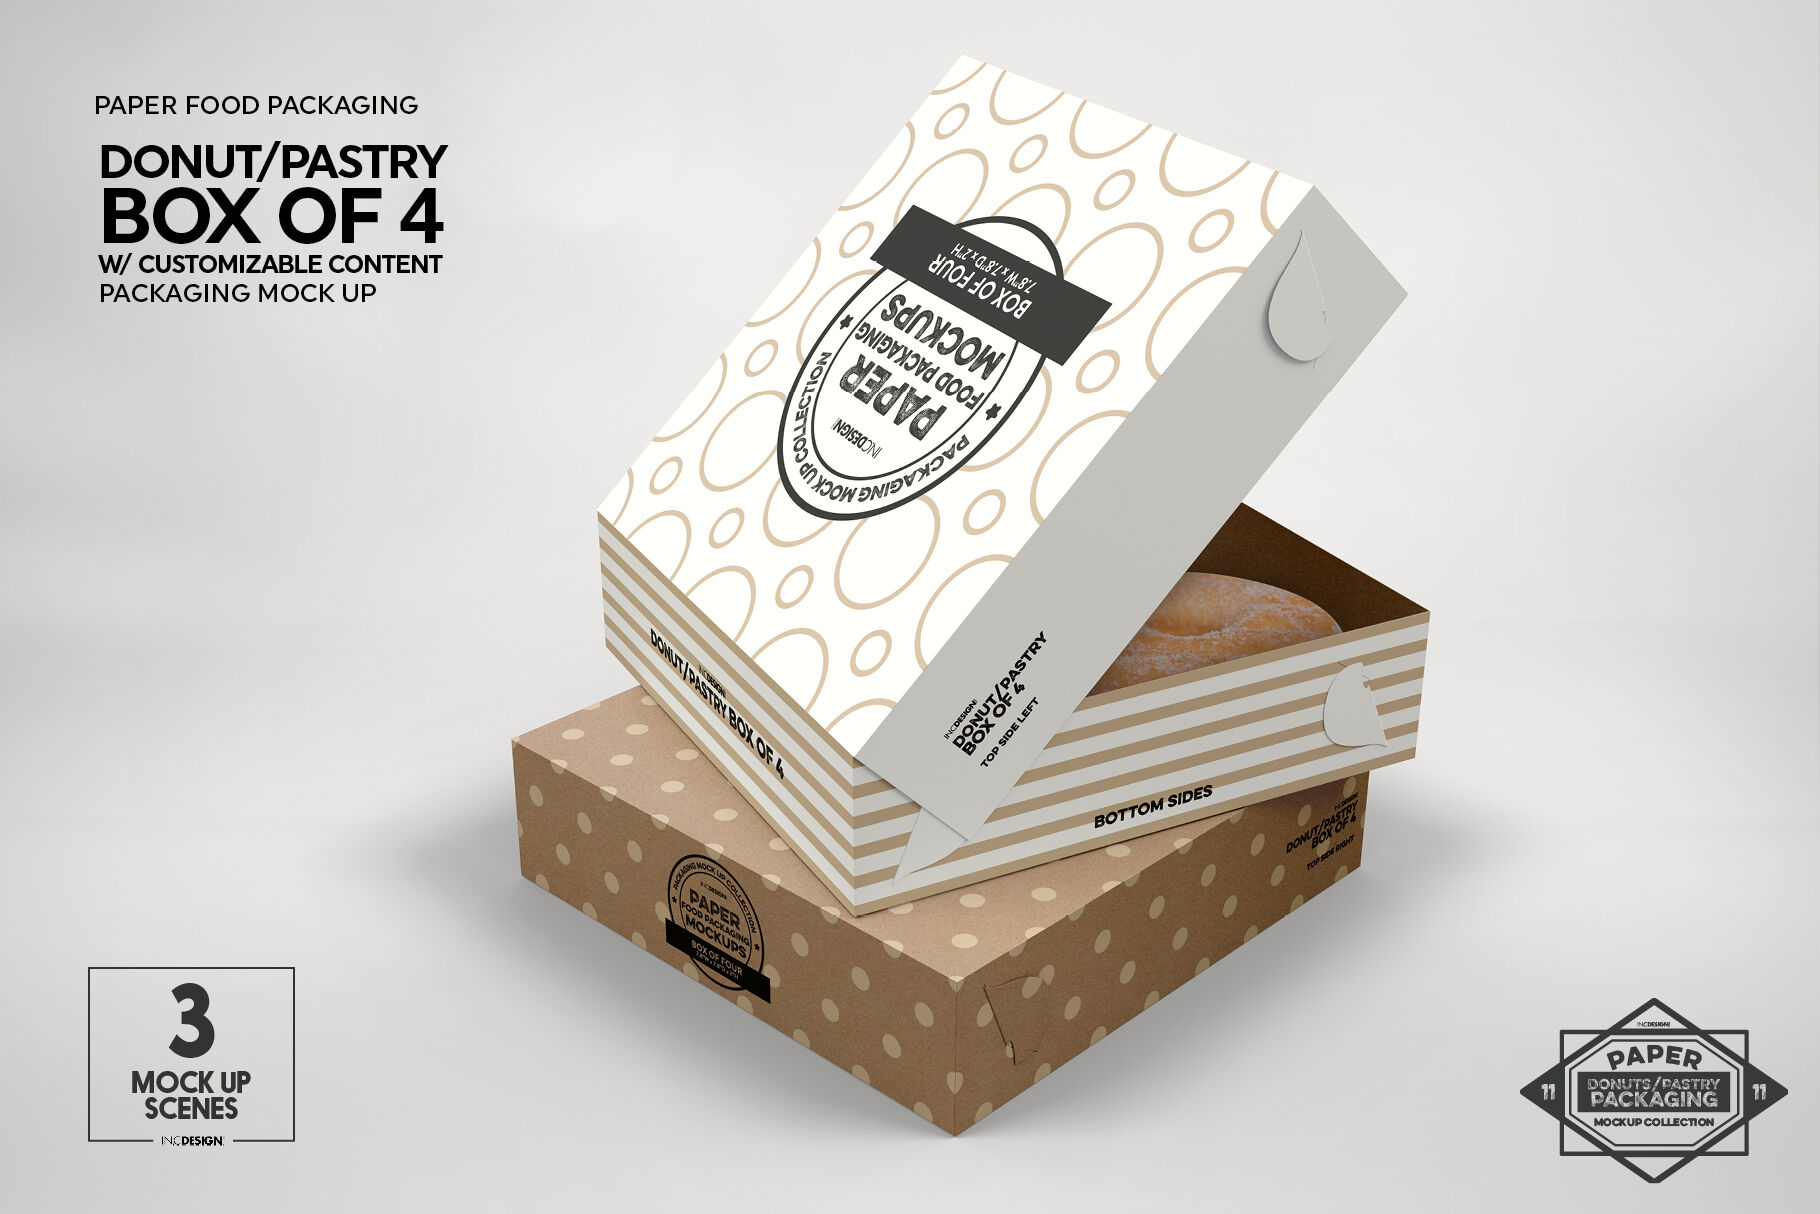 Download Design Mexican Food Packaging Mockup Free : Free Food Box Branding Mockup PSD | Free Mockup ...